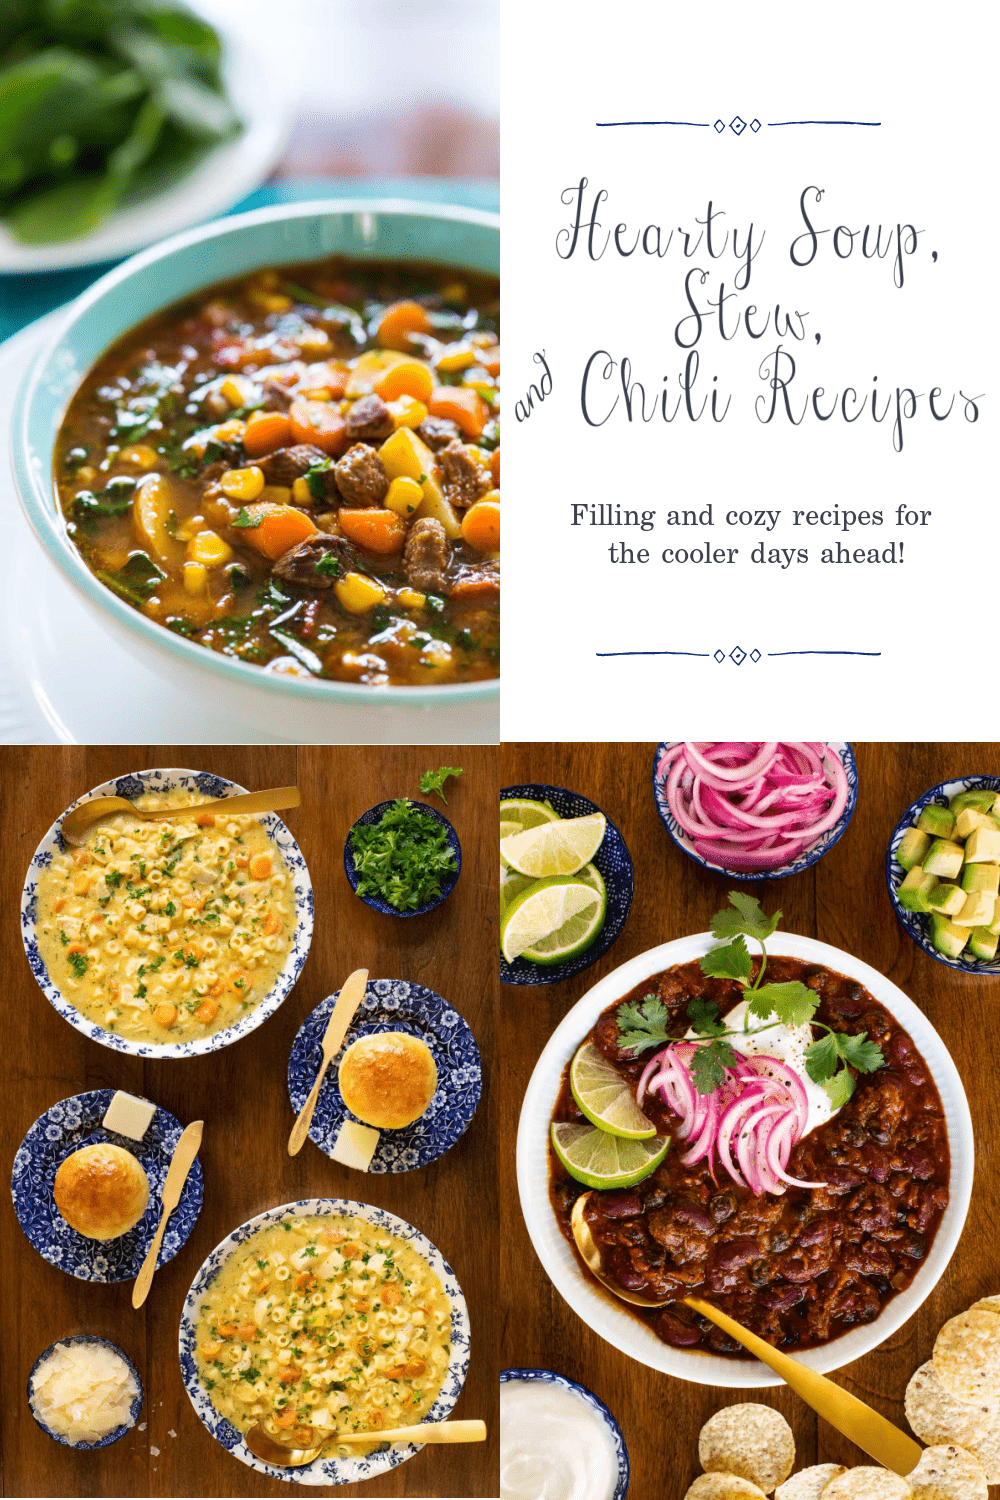 Hearty Meals in a Bowl to Warm the Cold Days Ahead!